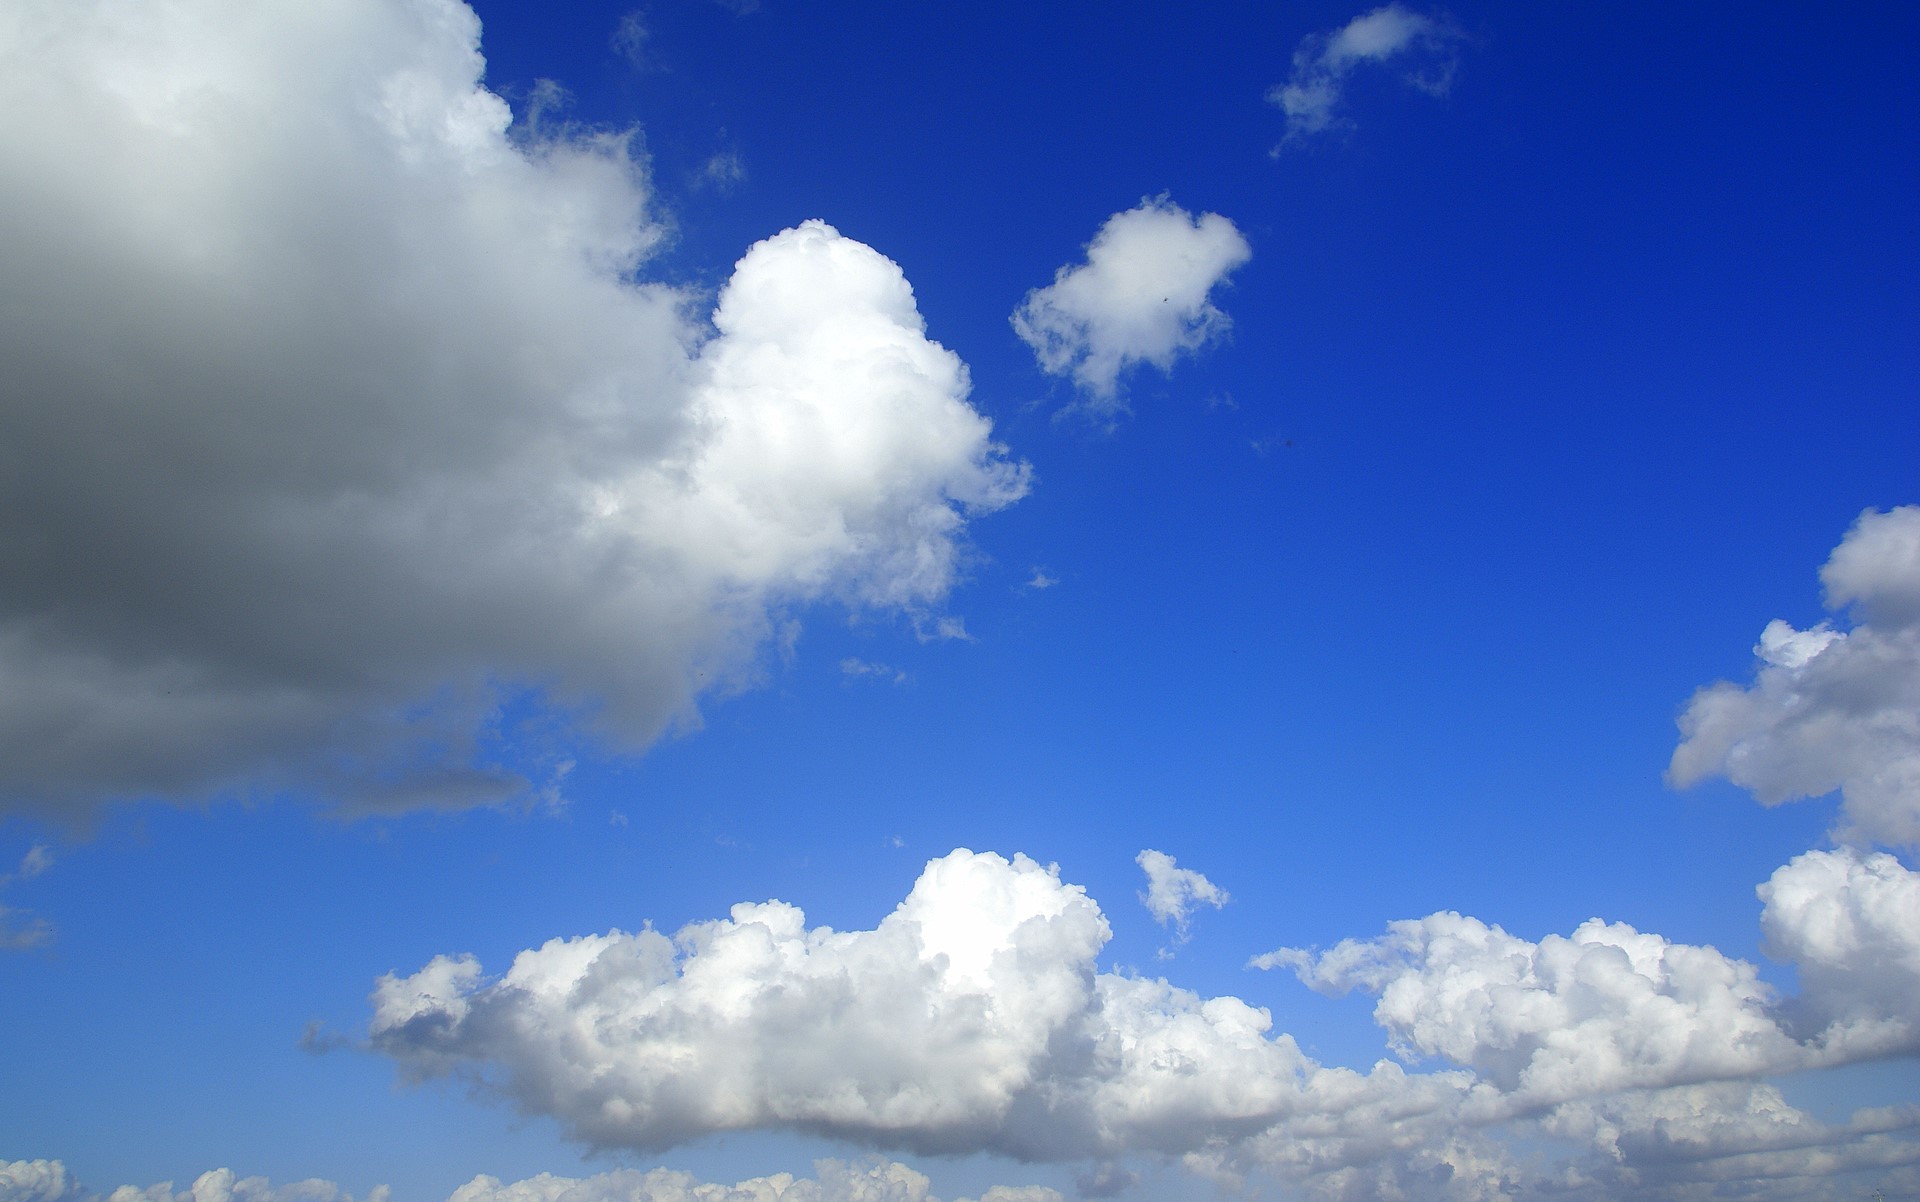 Blue Sky With Clouds Wallpaper (56+ images)